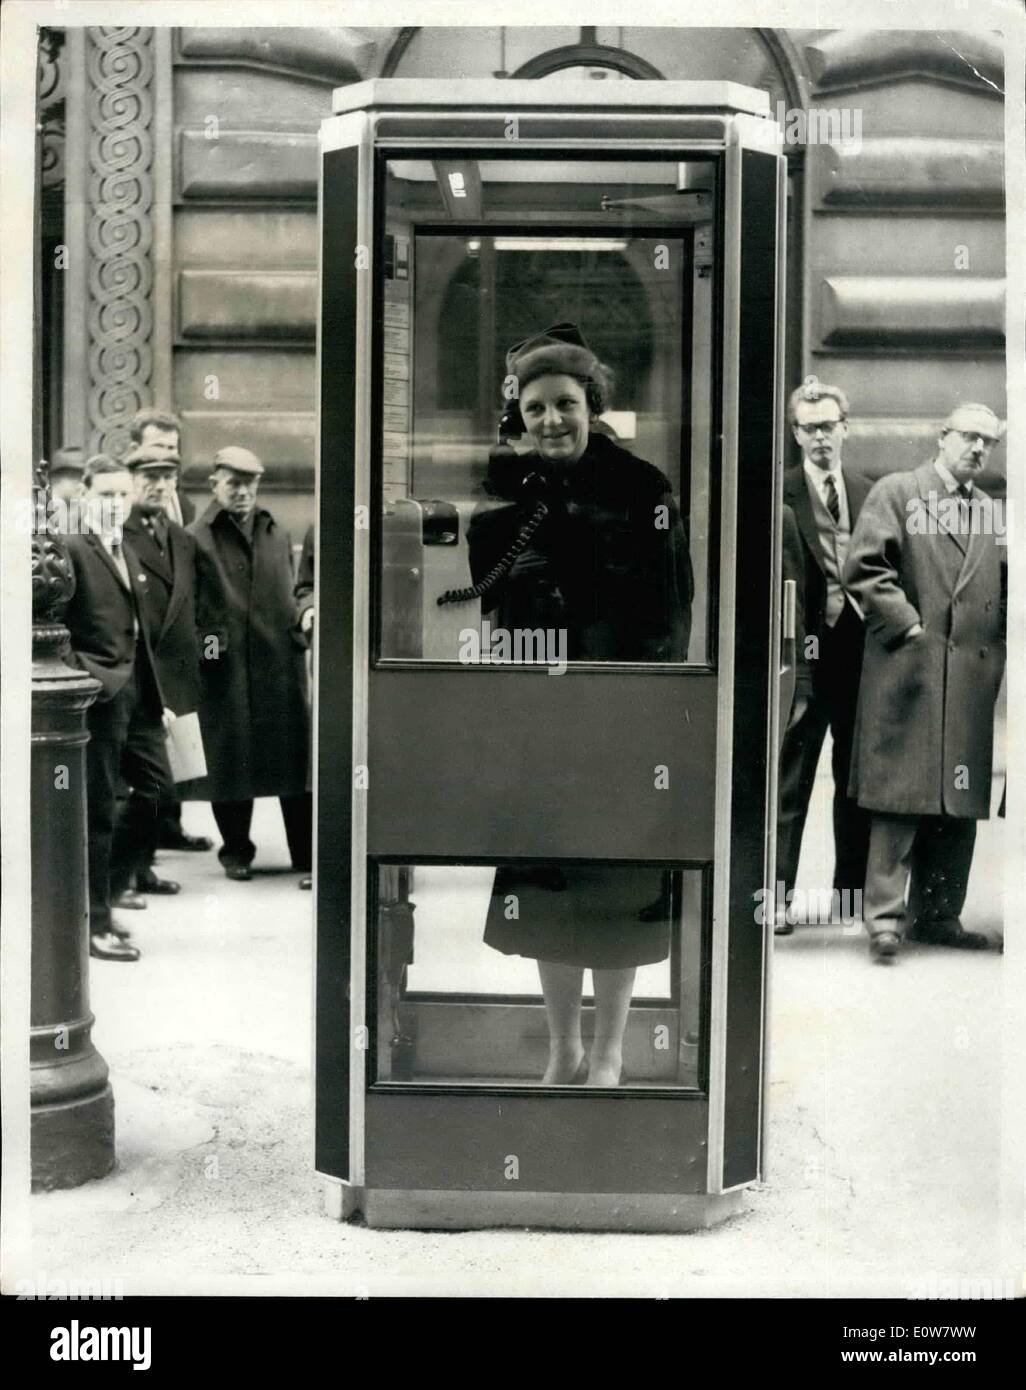 Jan. 01, 1962 - A NEW DEISIGN TELEPHONE KIOSK A new design of GPO telephone kiosk was shown in London at the Royal Exchange - this morning when it was inspeoted by Miss MERVYN PIKE, MP, Assistant Postmaster General. PHOTO SHOWS: Miss PIKE in the new deeign kiosk today. Stock Photo